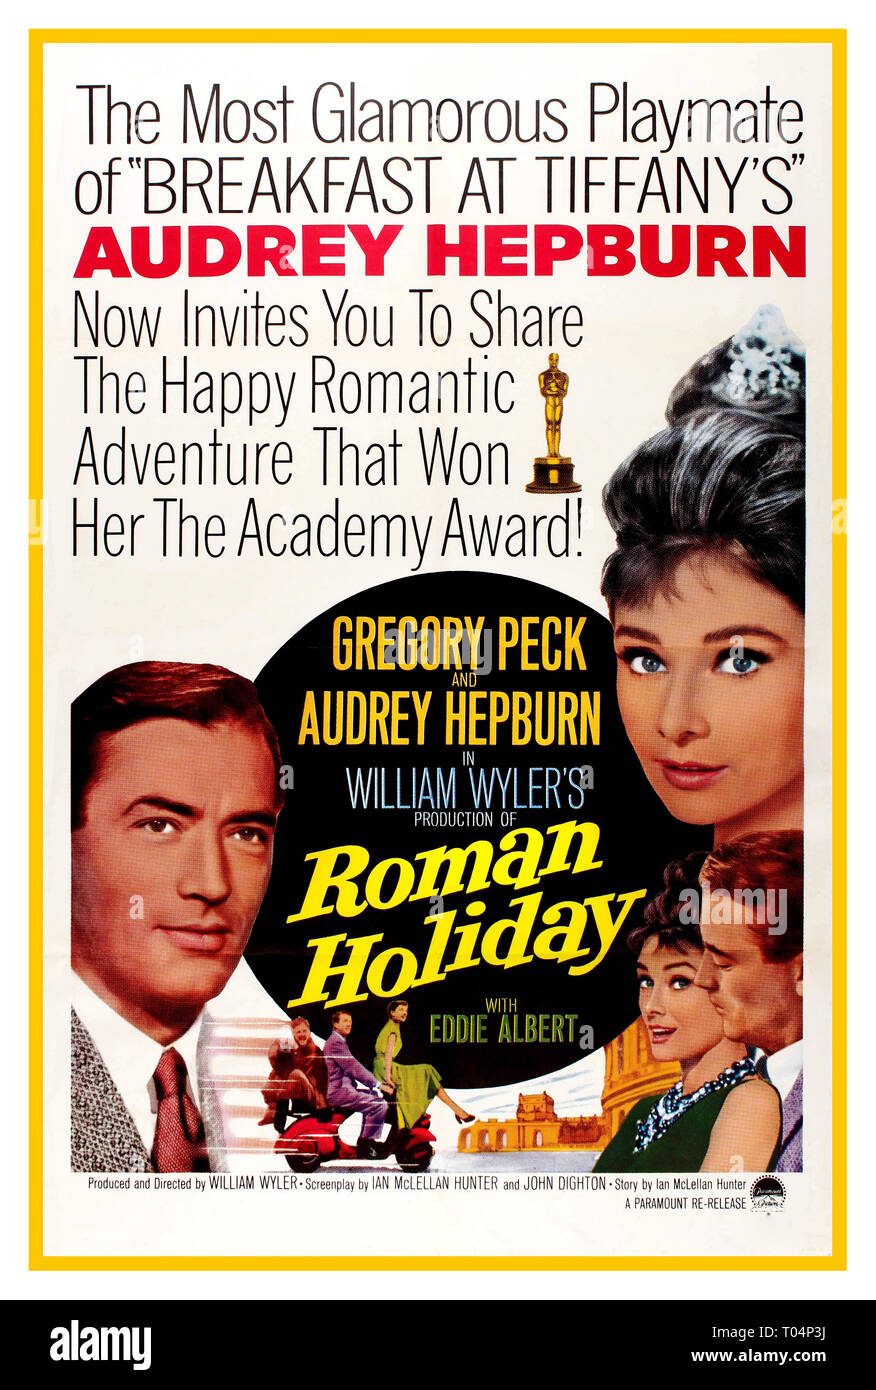 Vintage 1962 vintage movie poster for the re-release of the American Romantic comedy Roman Holiday, directed by William Wyler and starring Audrey Hepburn and Gregory Peck in the lead roles. Initially released in 1953, the film offered her first starring role to a young Audrey Hepburn for which she gained critical acclaim and won many awards, including The Academy Award for Best Actress. The film was then re-released in 1962 following the success of Breakfast at Tiffany's, Stock Photo